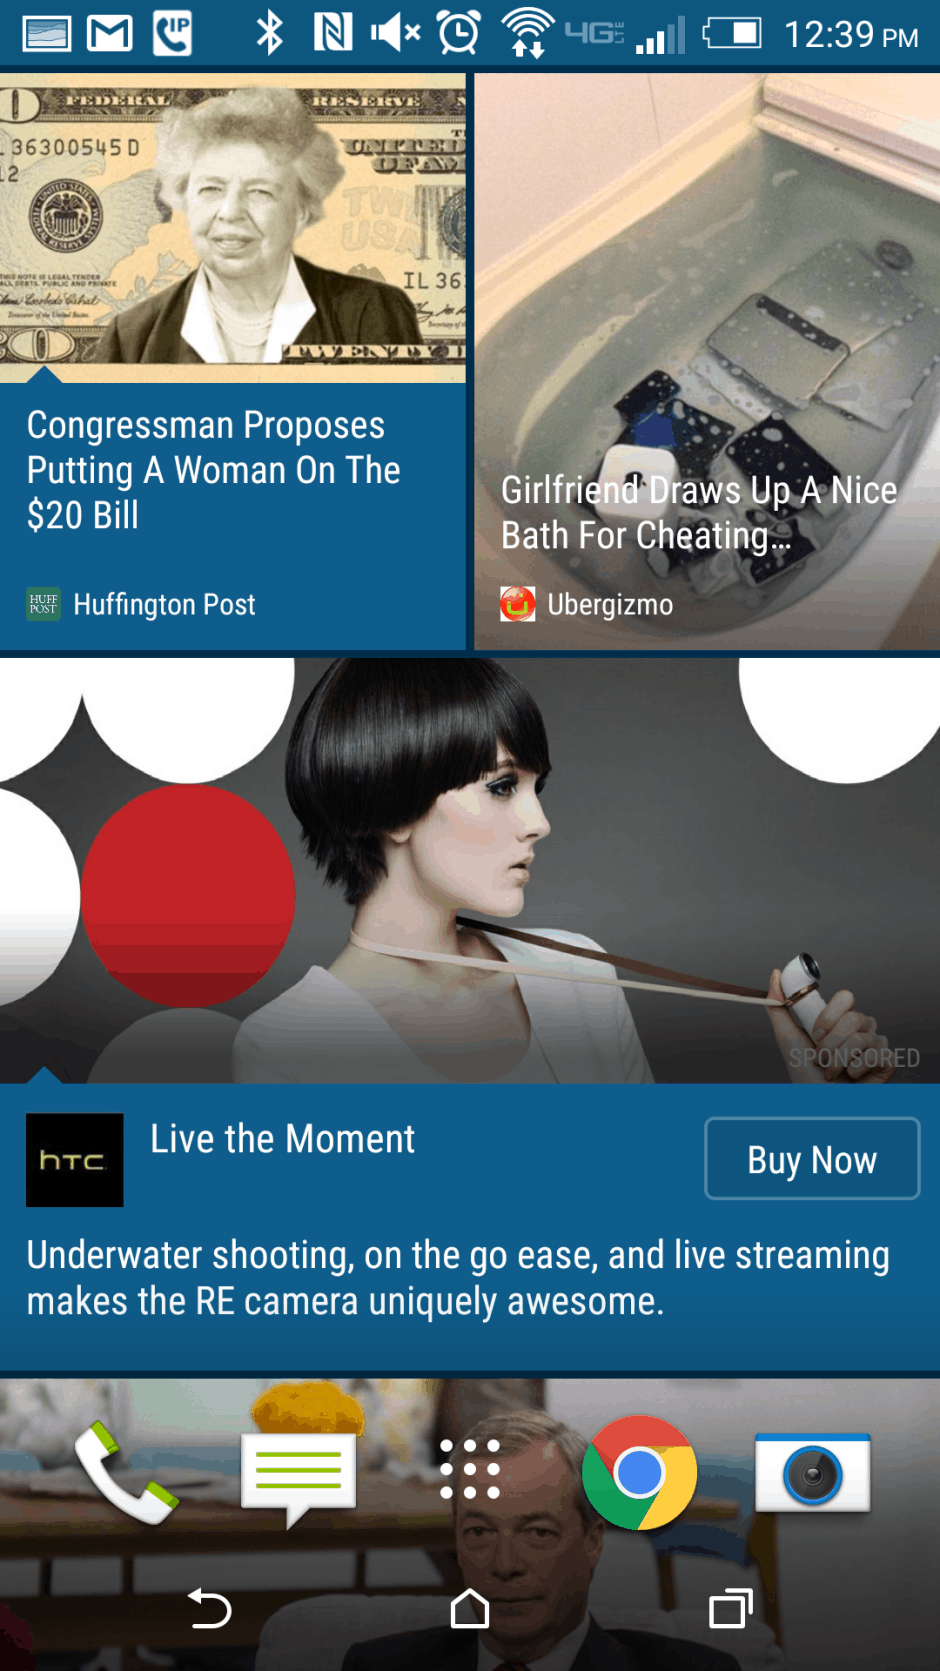 Here's how an HTC ad appears in BlinkFeed. Screenshot: HTC